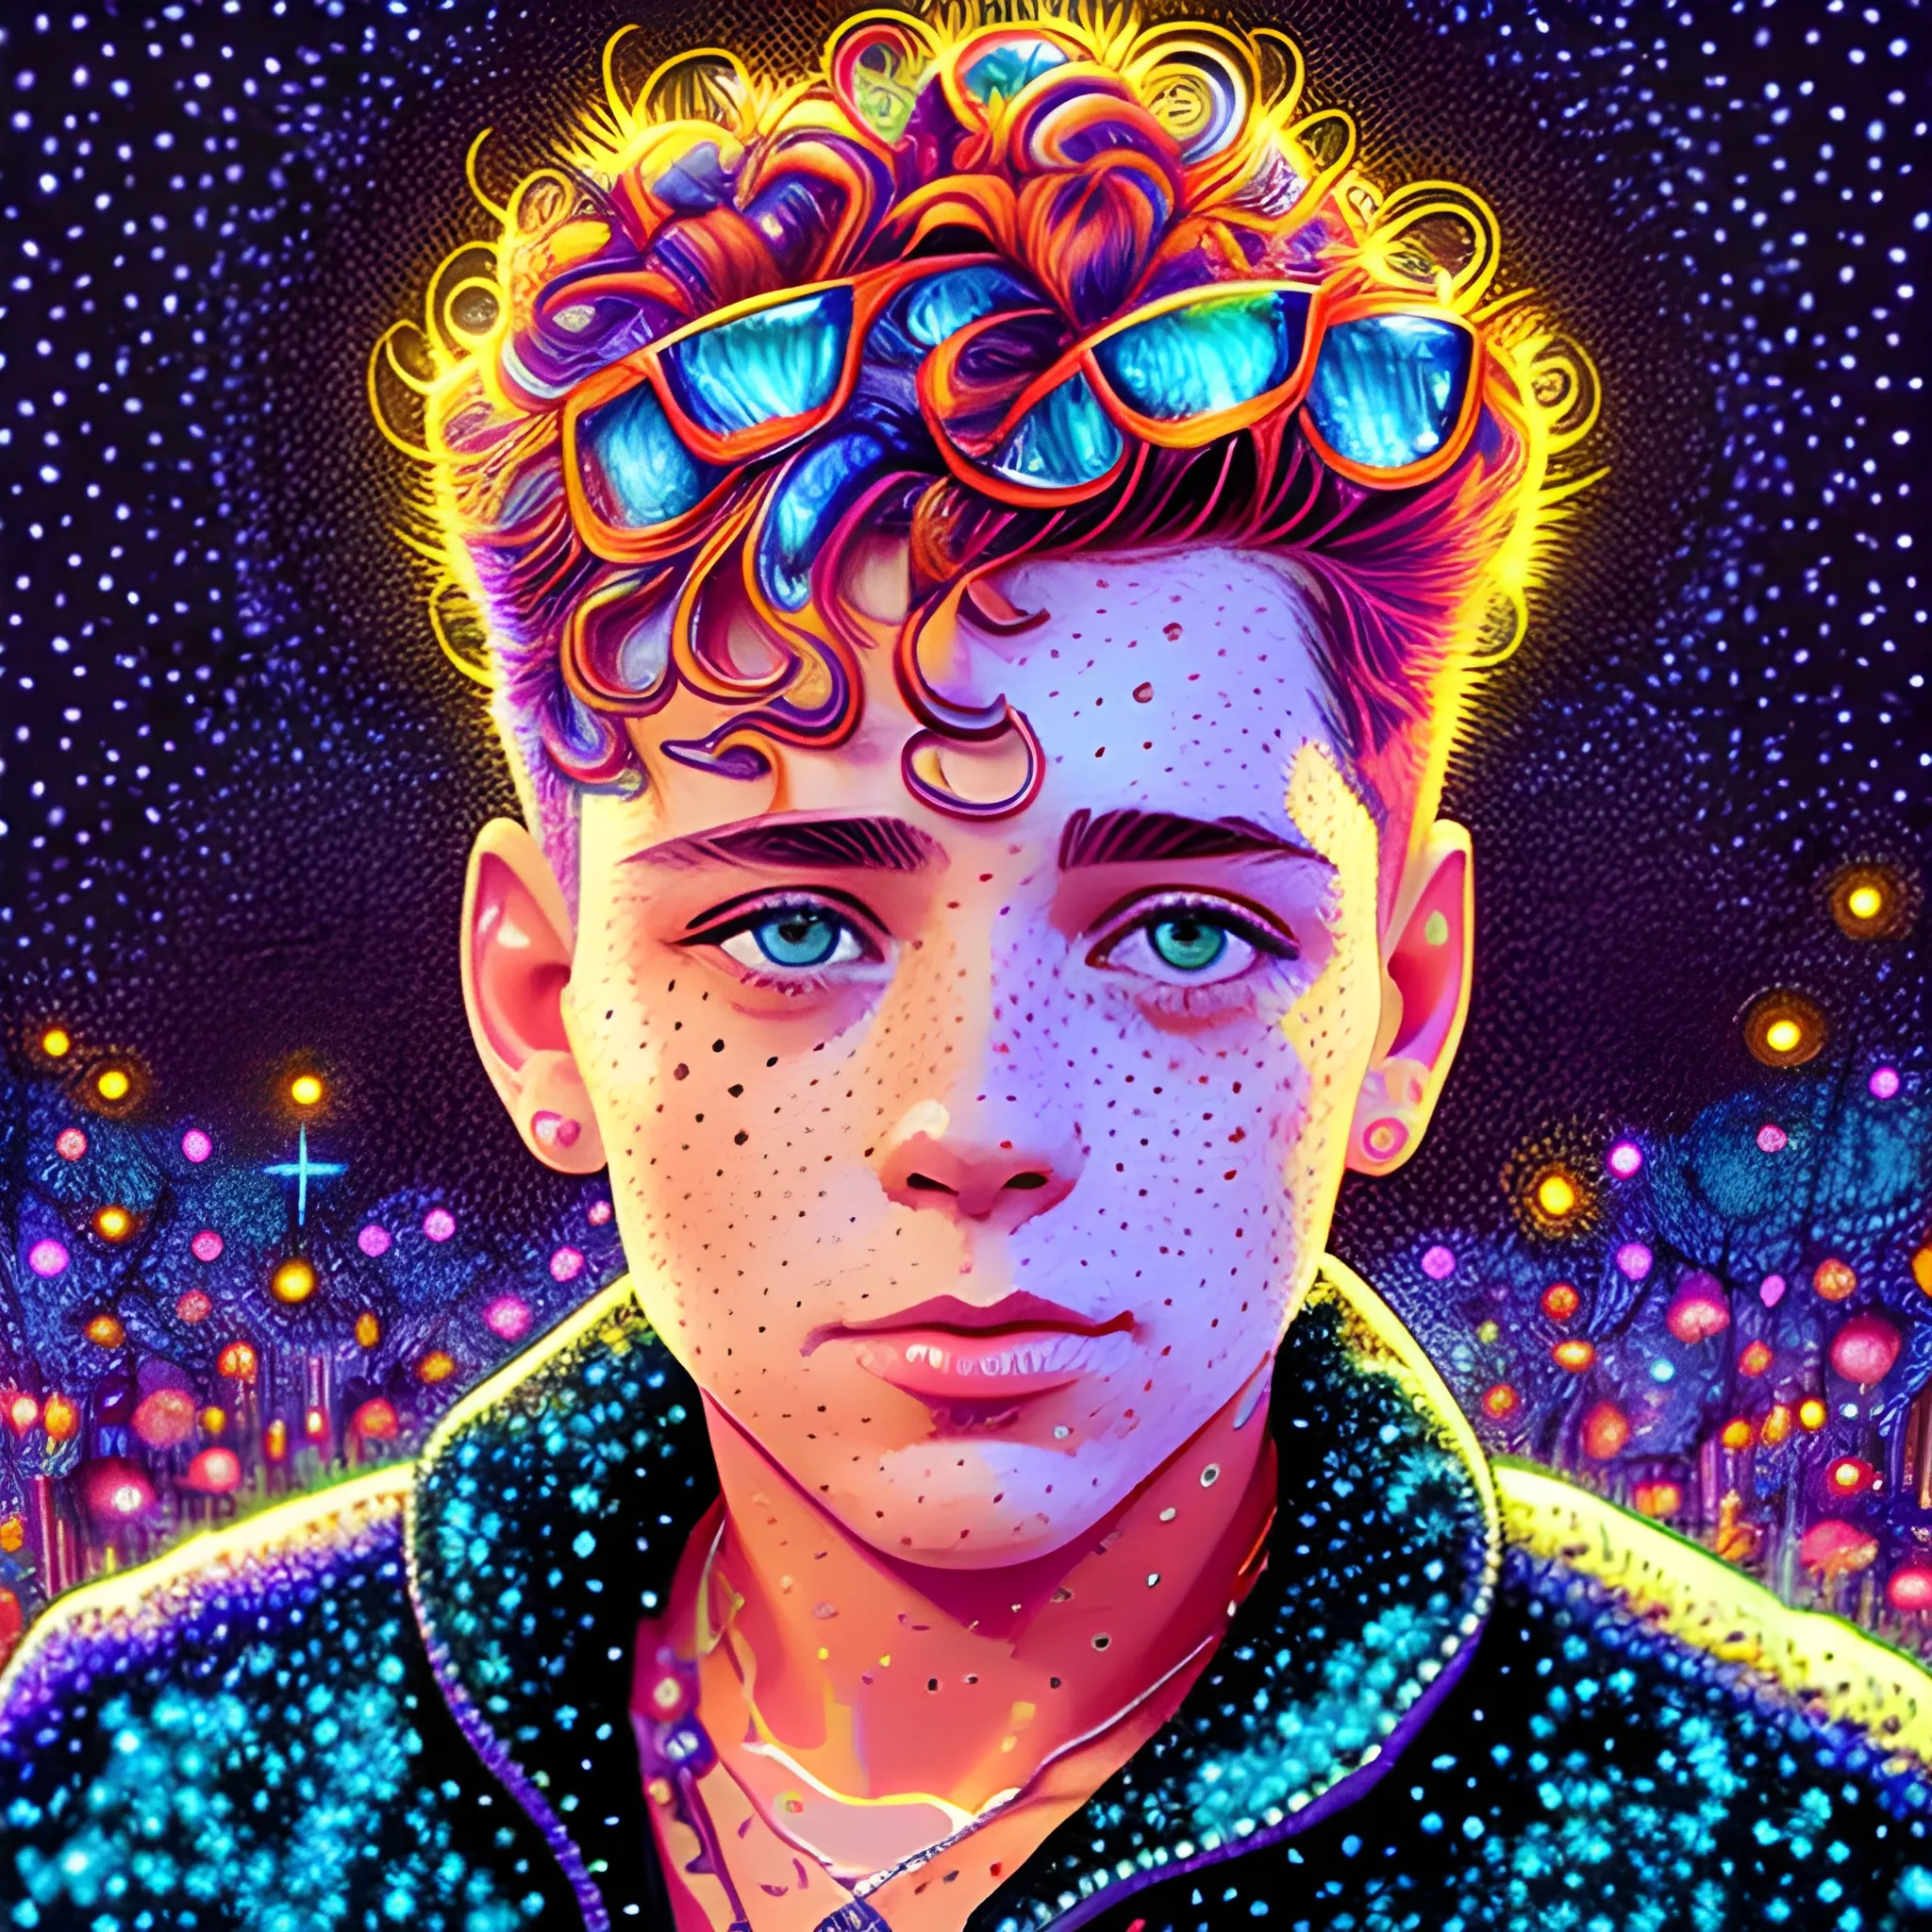 Corey Haim, his highly detailed, softly freckled handsome face, meticulously detailed multi-hued hair; by James R. Eads, Fausto-Giurescu, Tania Rivilis, Dan Mumford; luminous colorful sparkles, glitter, airbrush, depth of field, volumetric lighting, rockstar